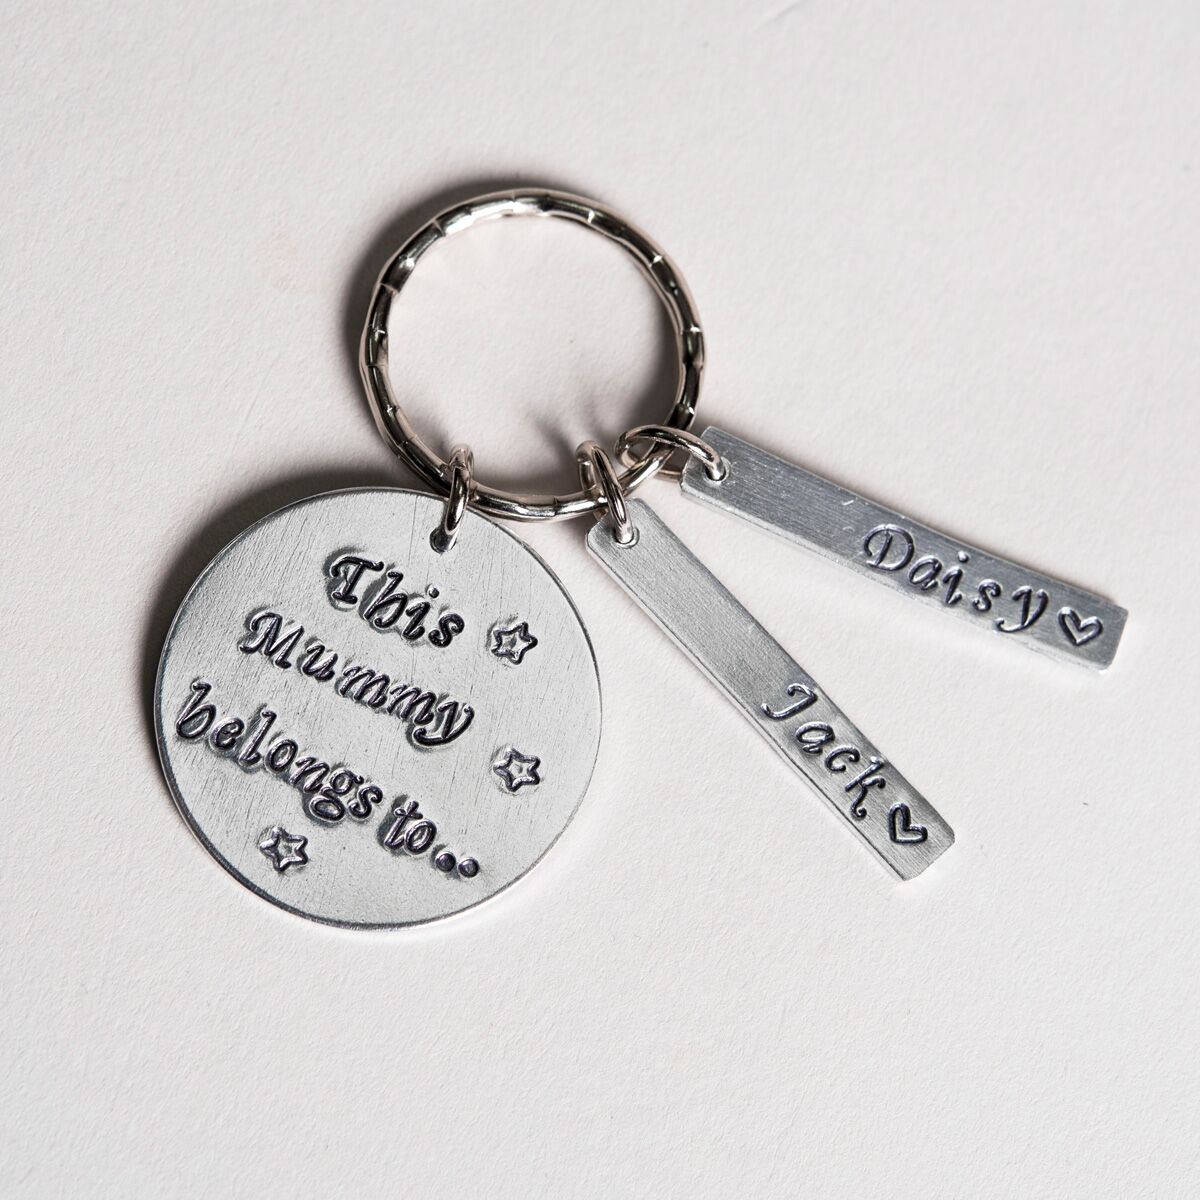 Nutcase Name Keychain Personalized Couples Engraved Key Ring Gifts for  Husband Wife Girlfriend Boyfriend. : Amazon.in: बैग, वॉलेट और लगेज